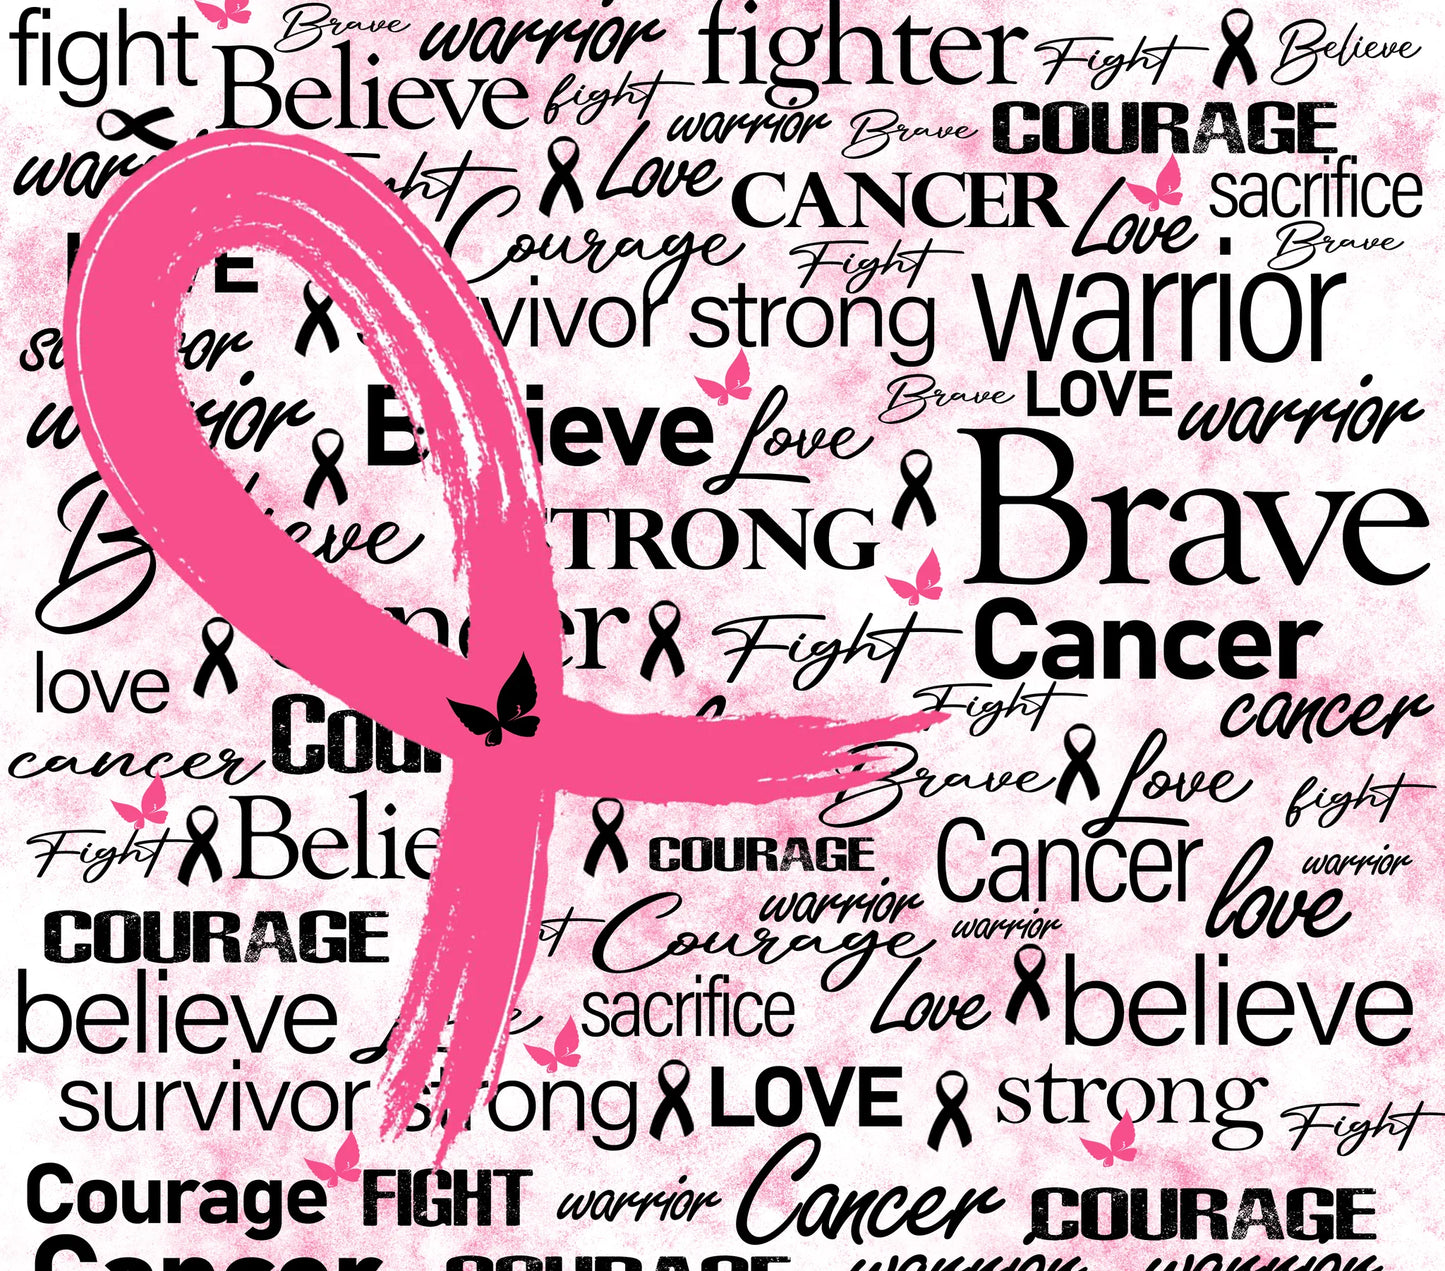 Breast Cancer Awareness - Qualities of a Survivor - Pink Ribbon w/ Black Butterfly w/ Light Pink & White Background - 20 Oz Sublimation Transfer